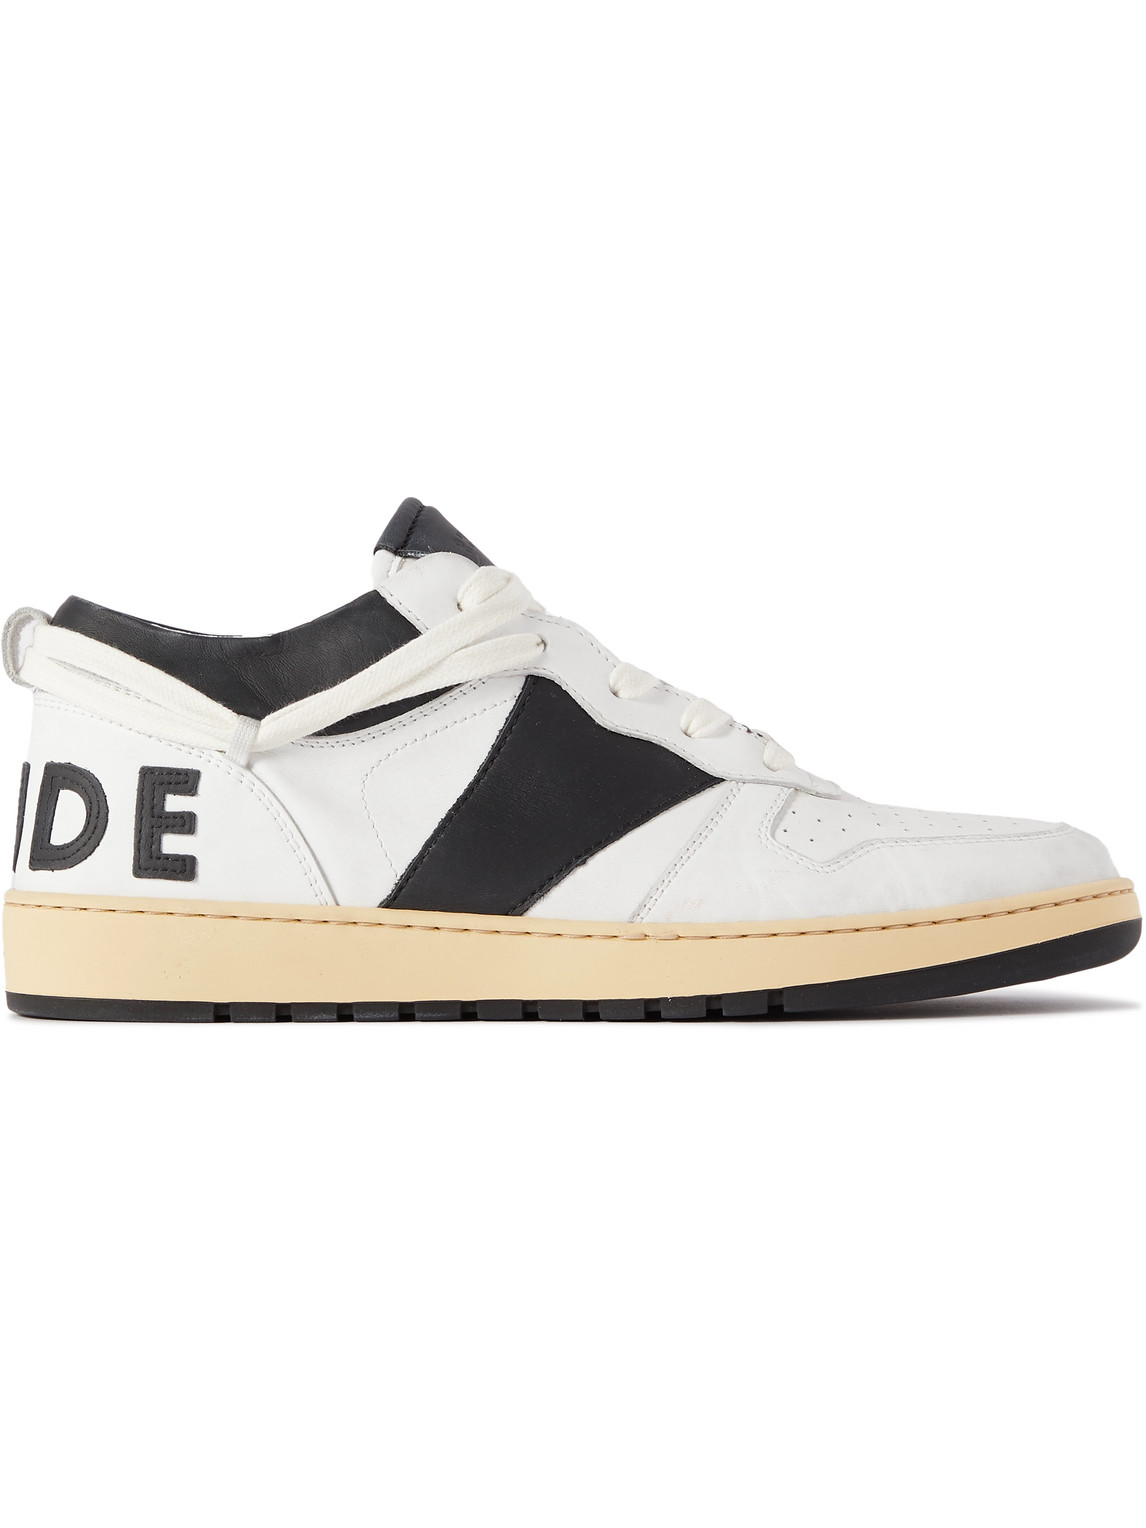 Rhude - Rhecess Colour-Block Distressed Leather Sneakers - Men - White - US 7 von Rhude